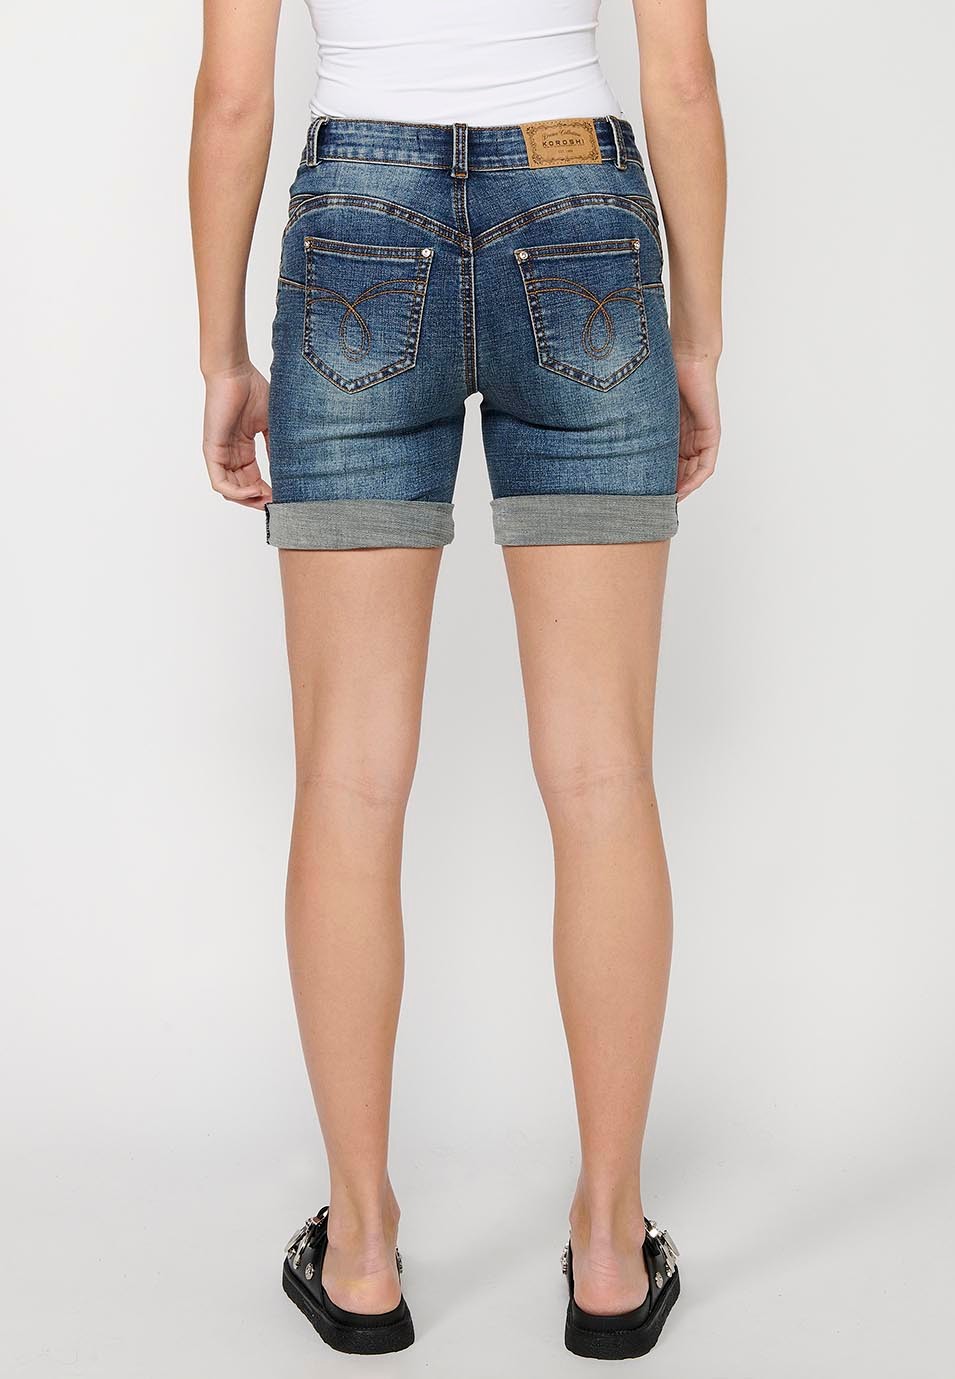 Short shorts with a turn-up finish with front zipper and button closure and blue floral embroidery for Women 5